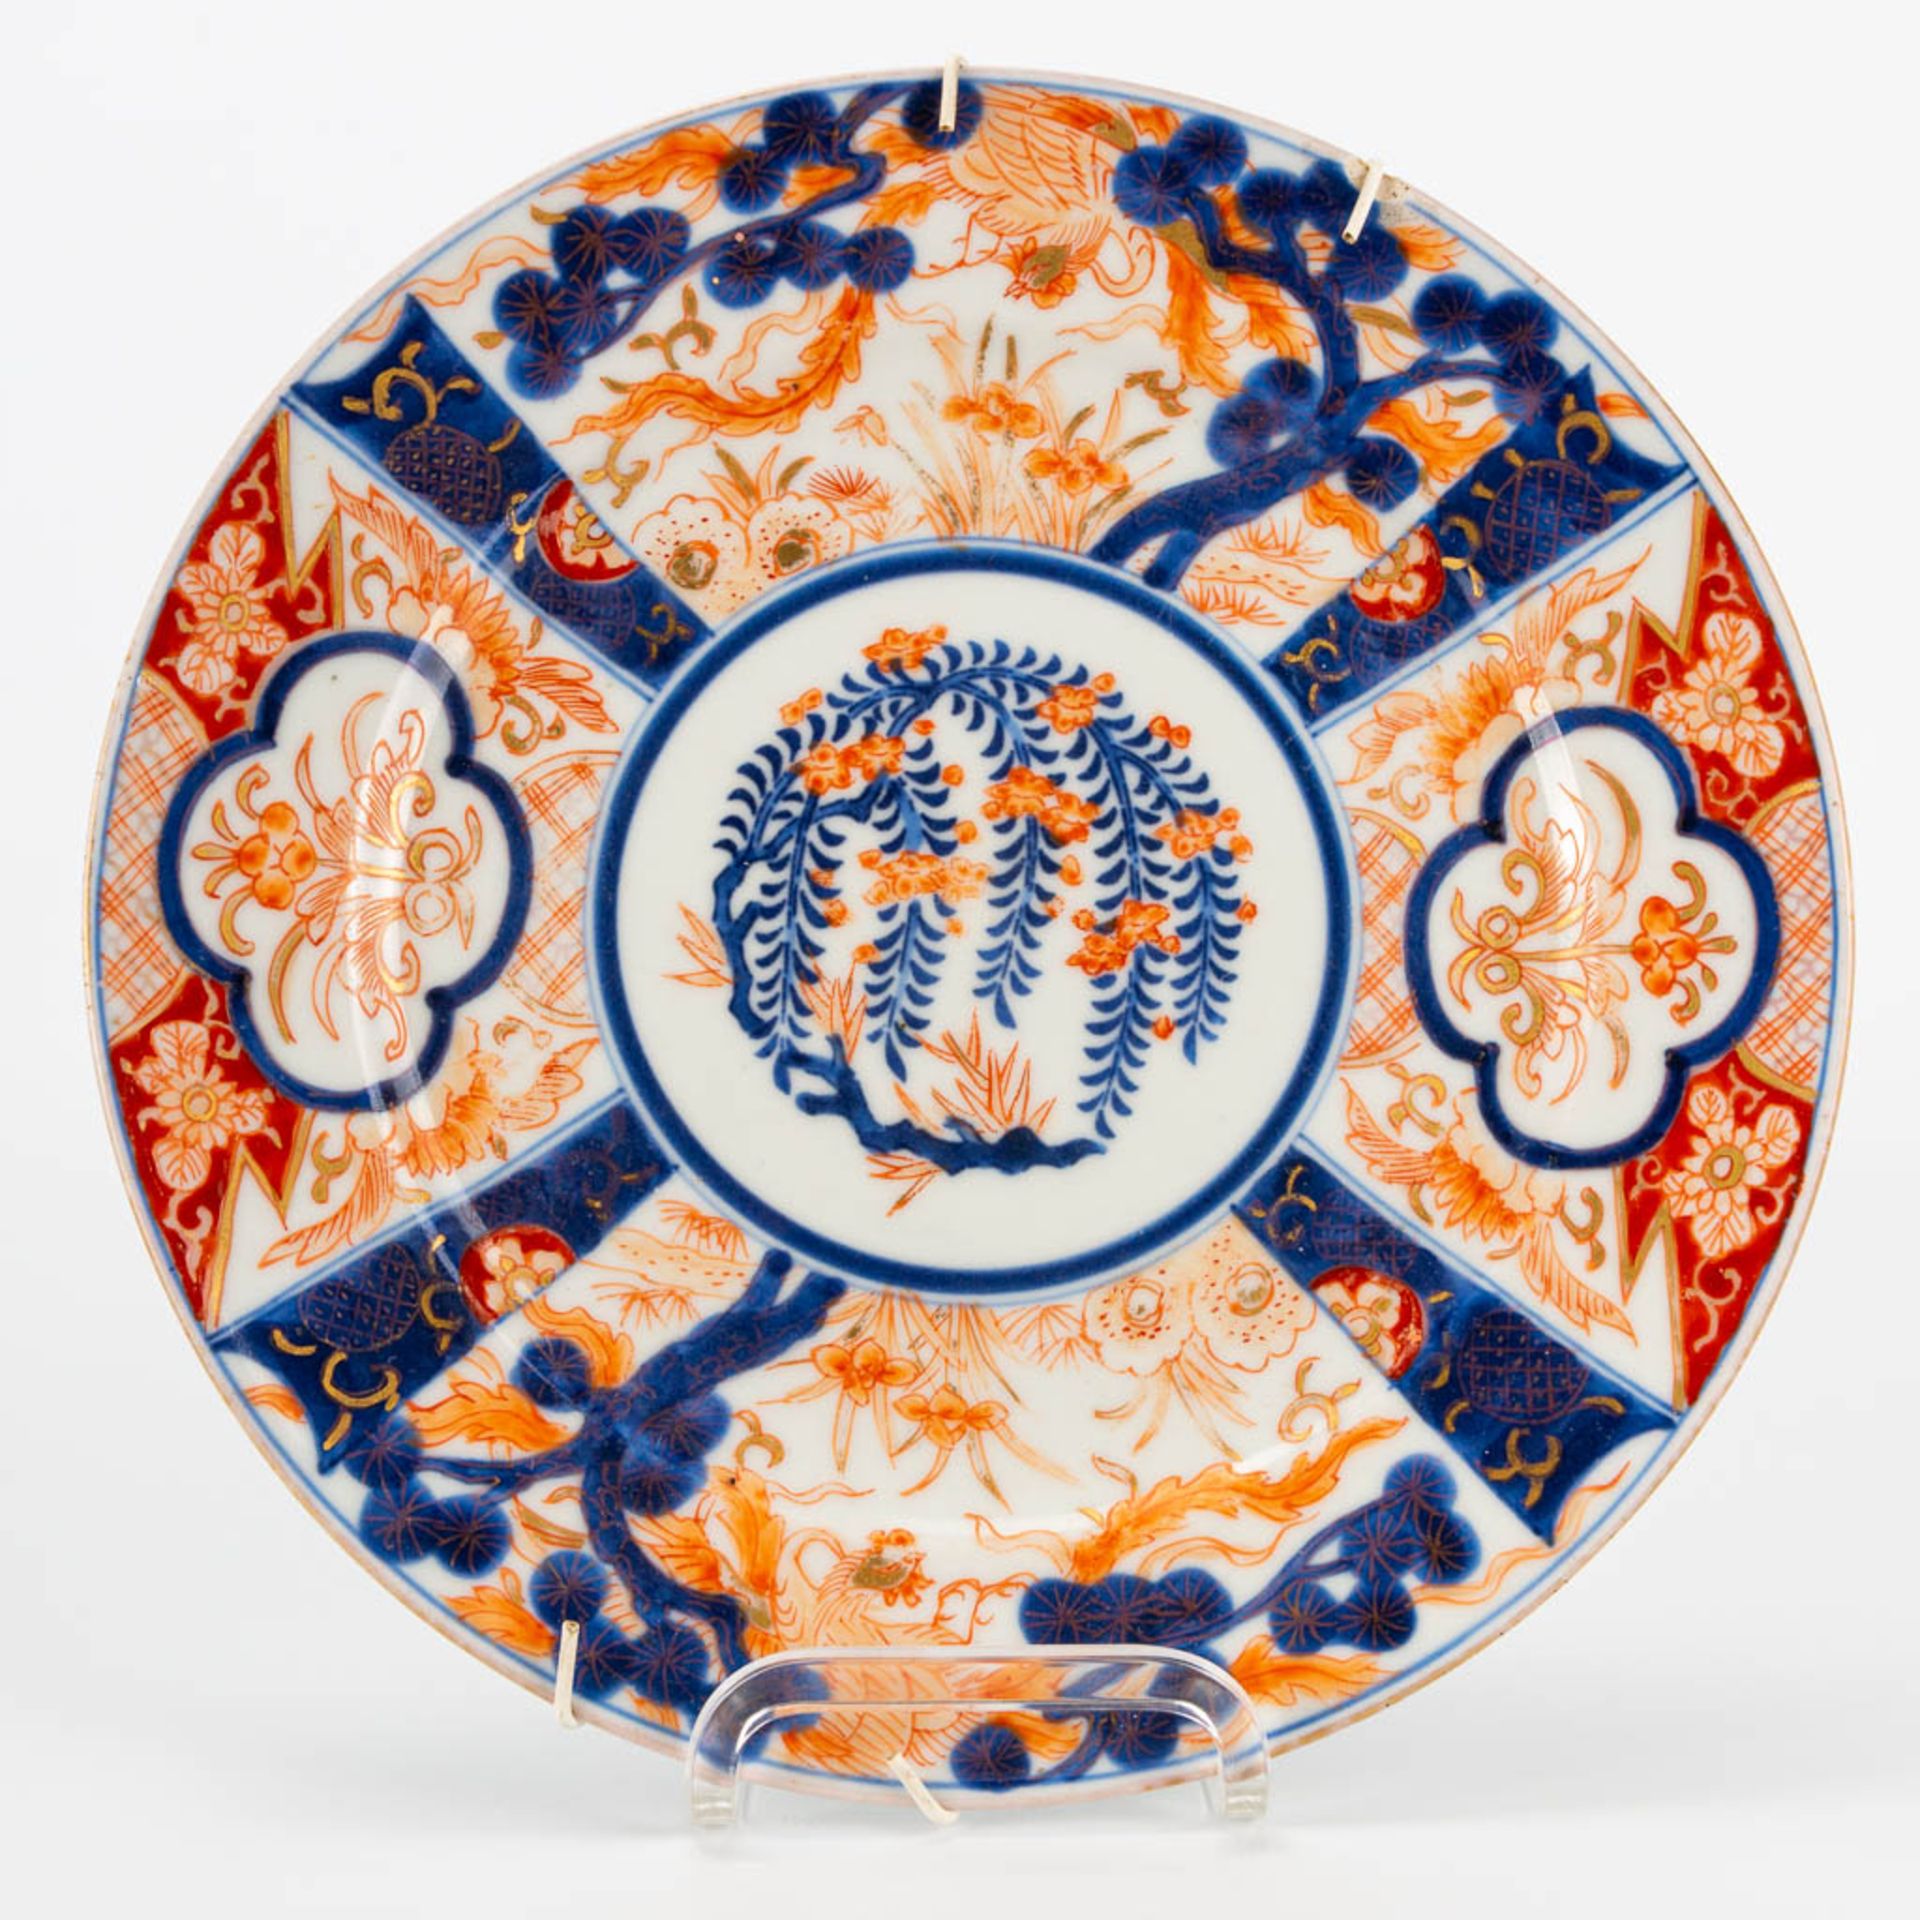 An assembled collection of 10 plates made of Japanese porcelain, Imari, blue white. (4 x 25 cm) - Image 11 of 16